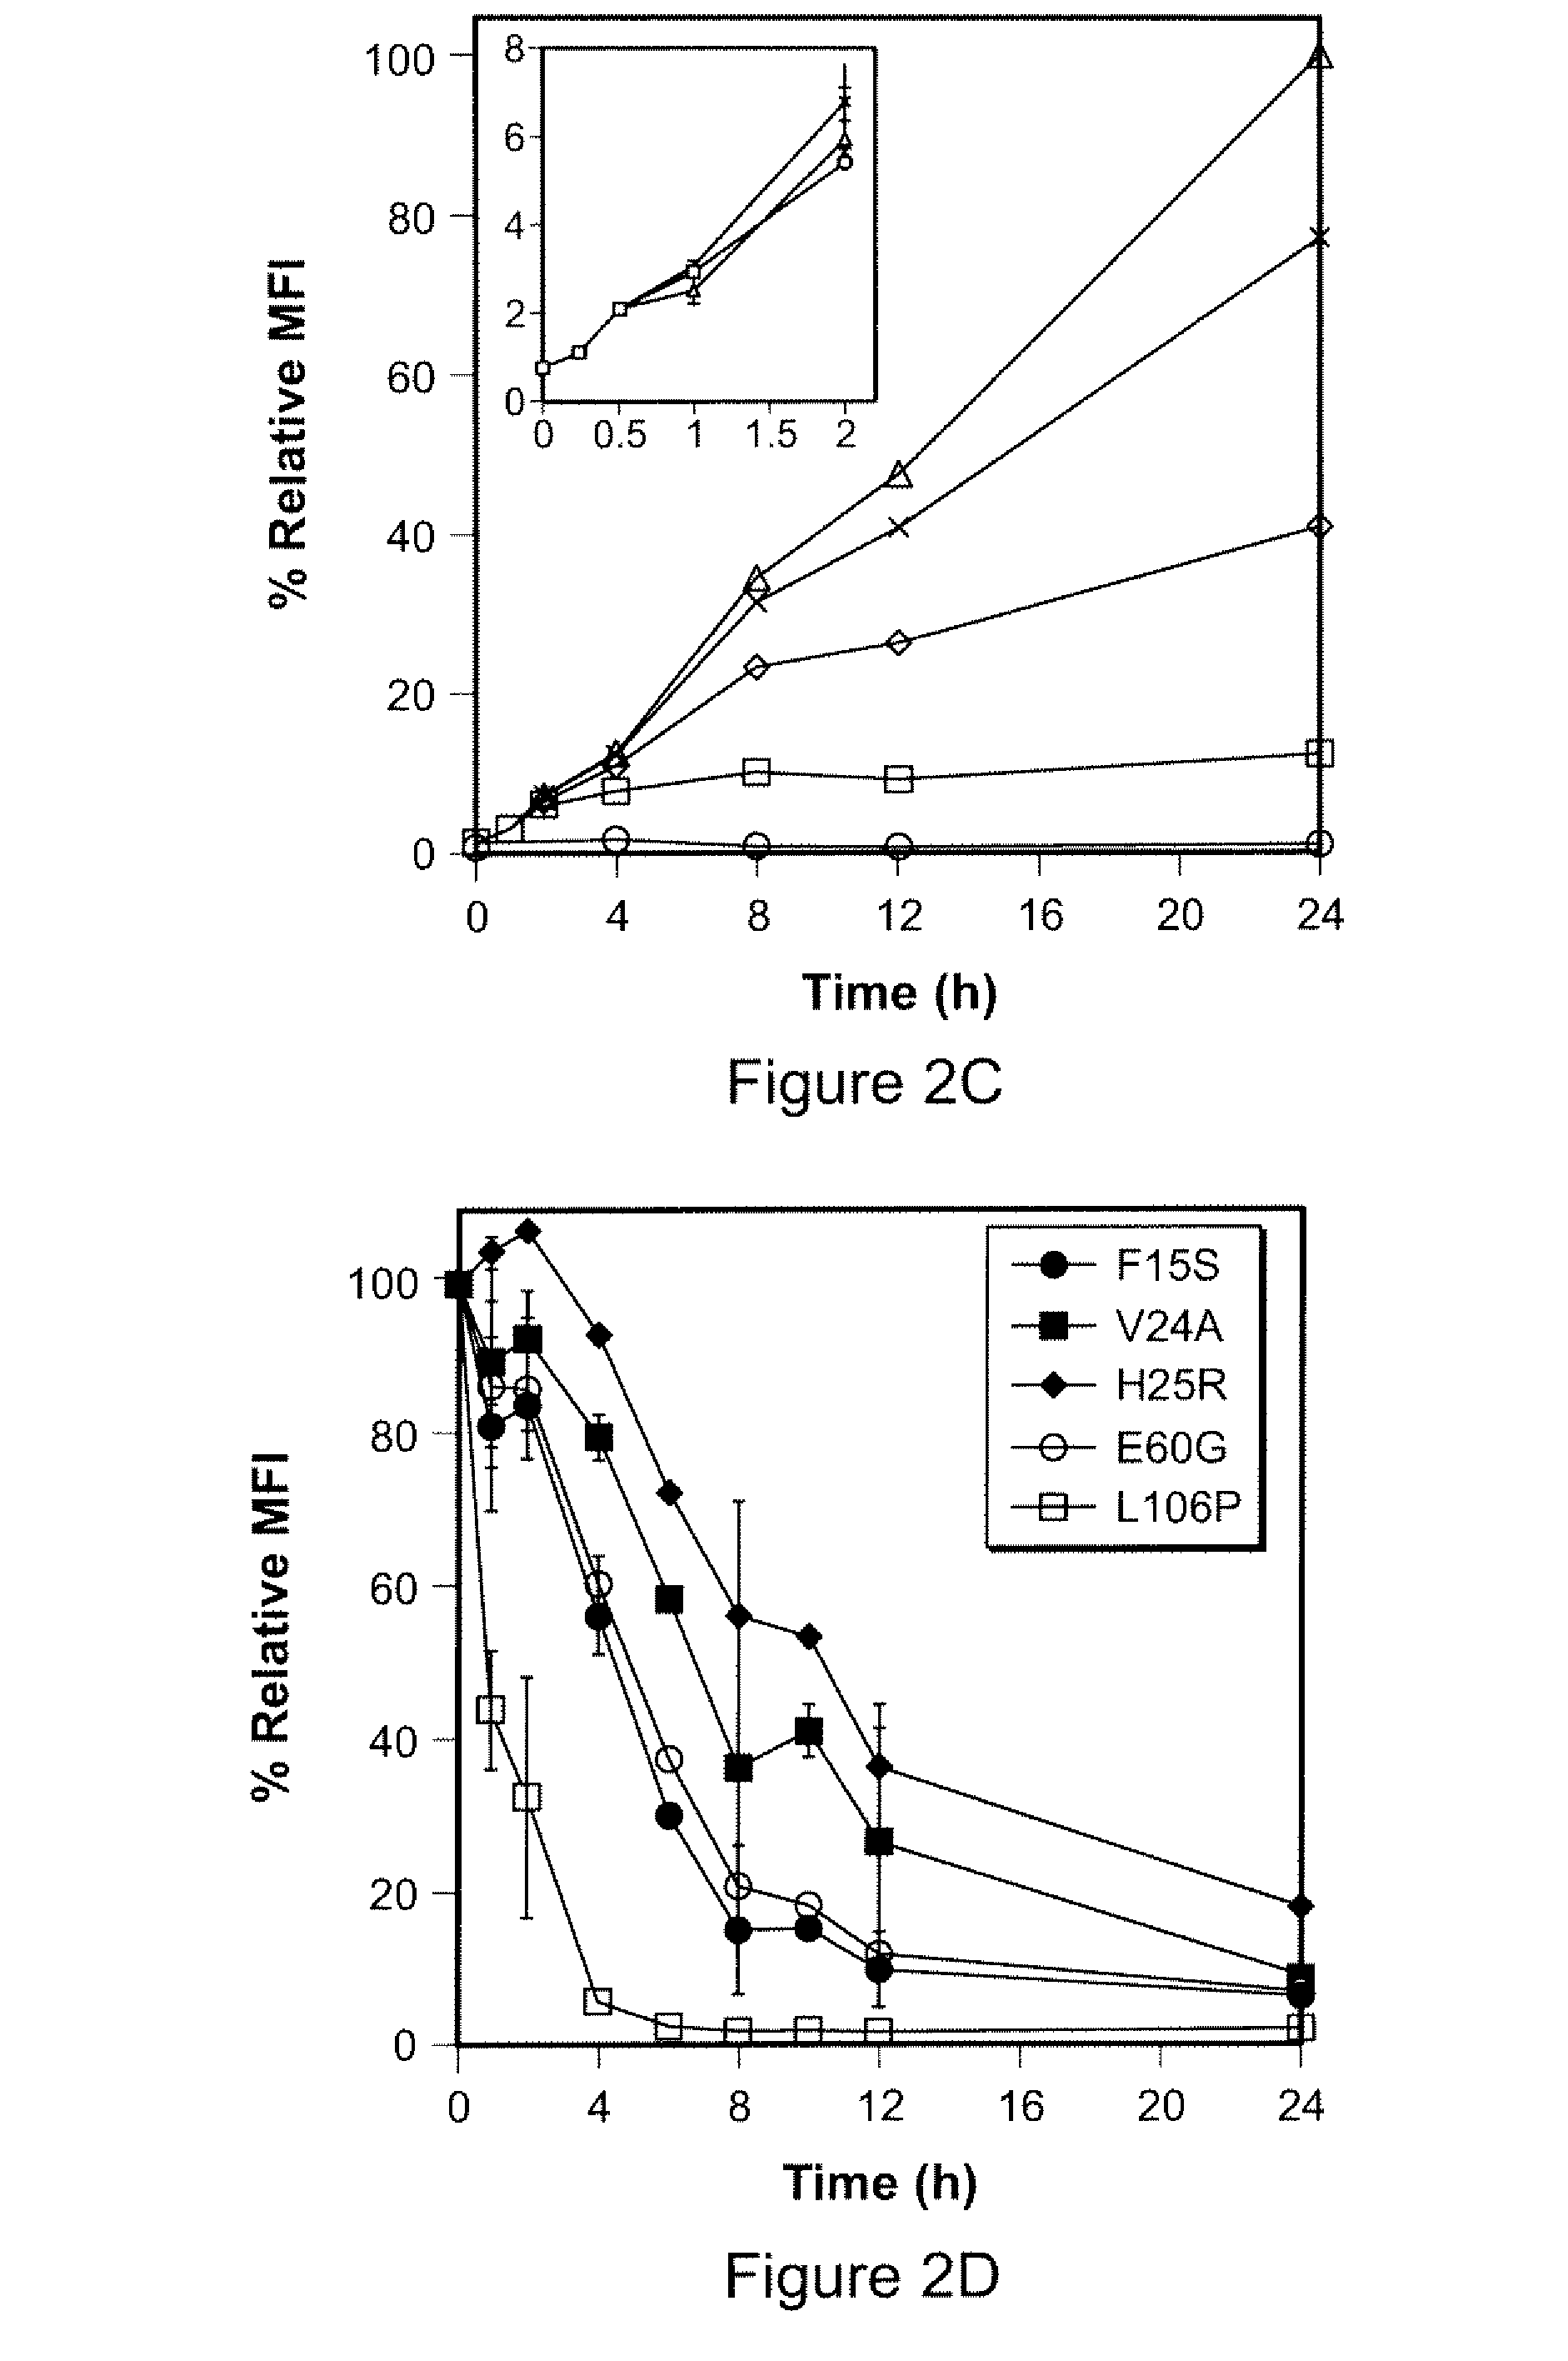 Method for regulating protein function in cells in vivo using synthetic small molecules